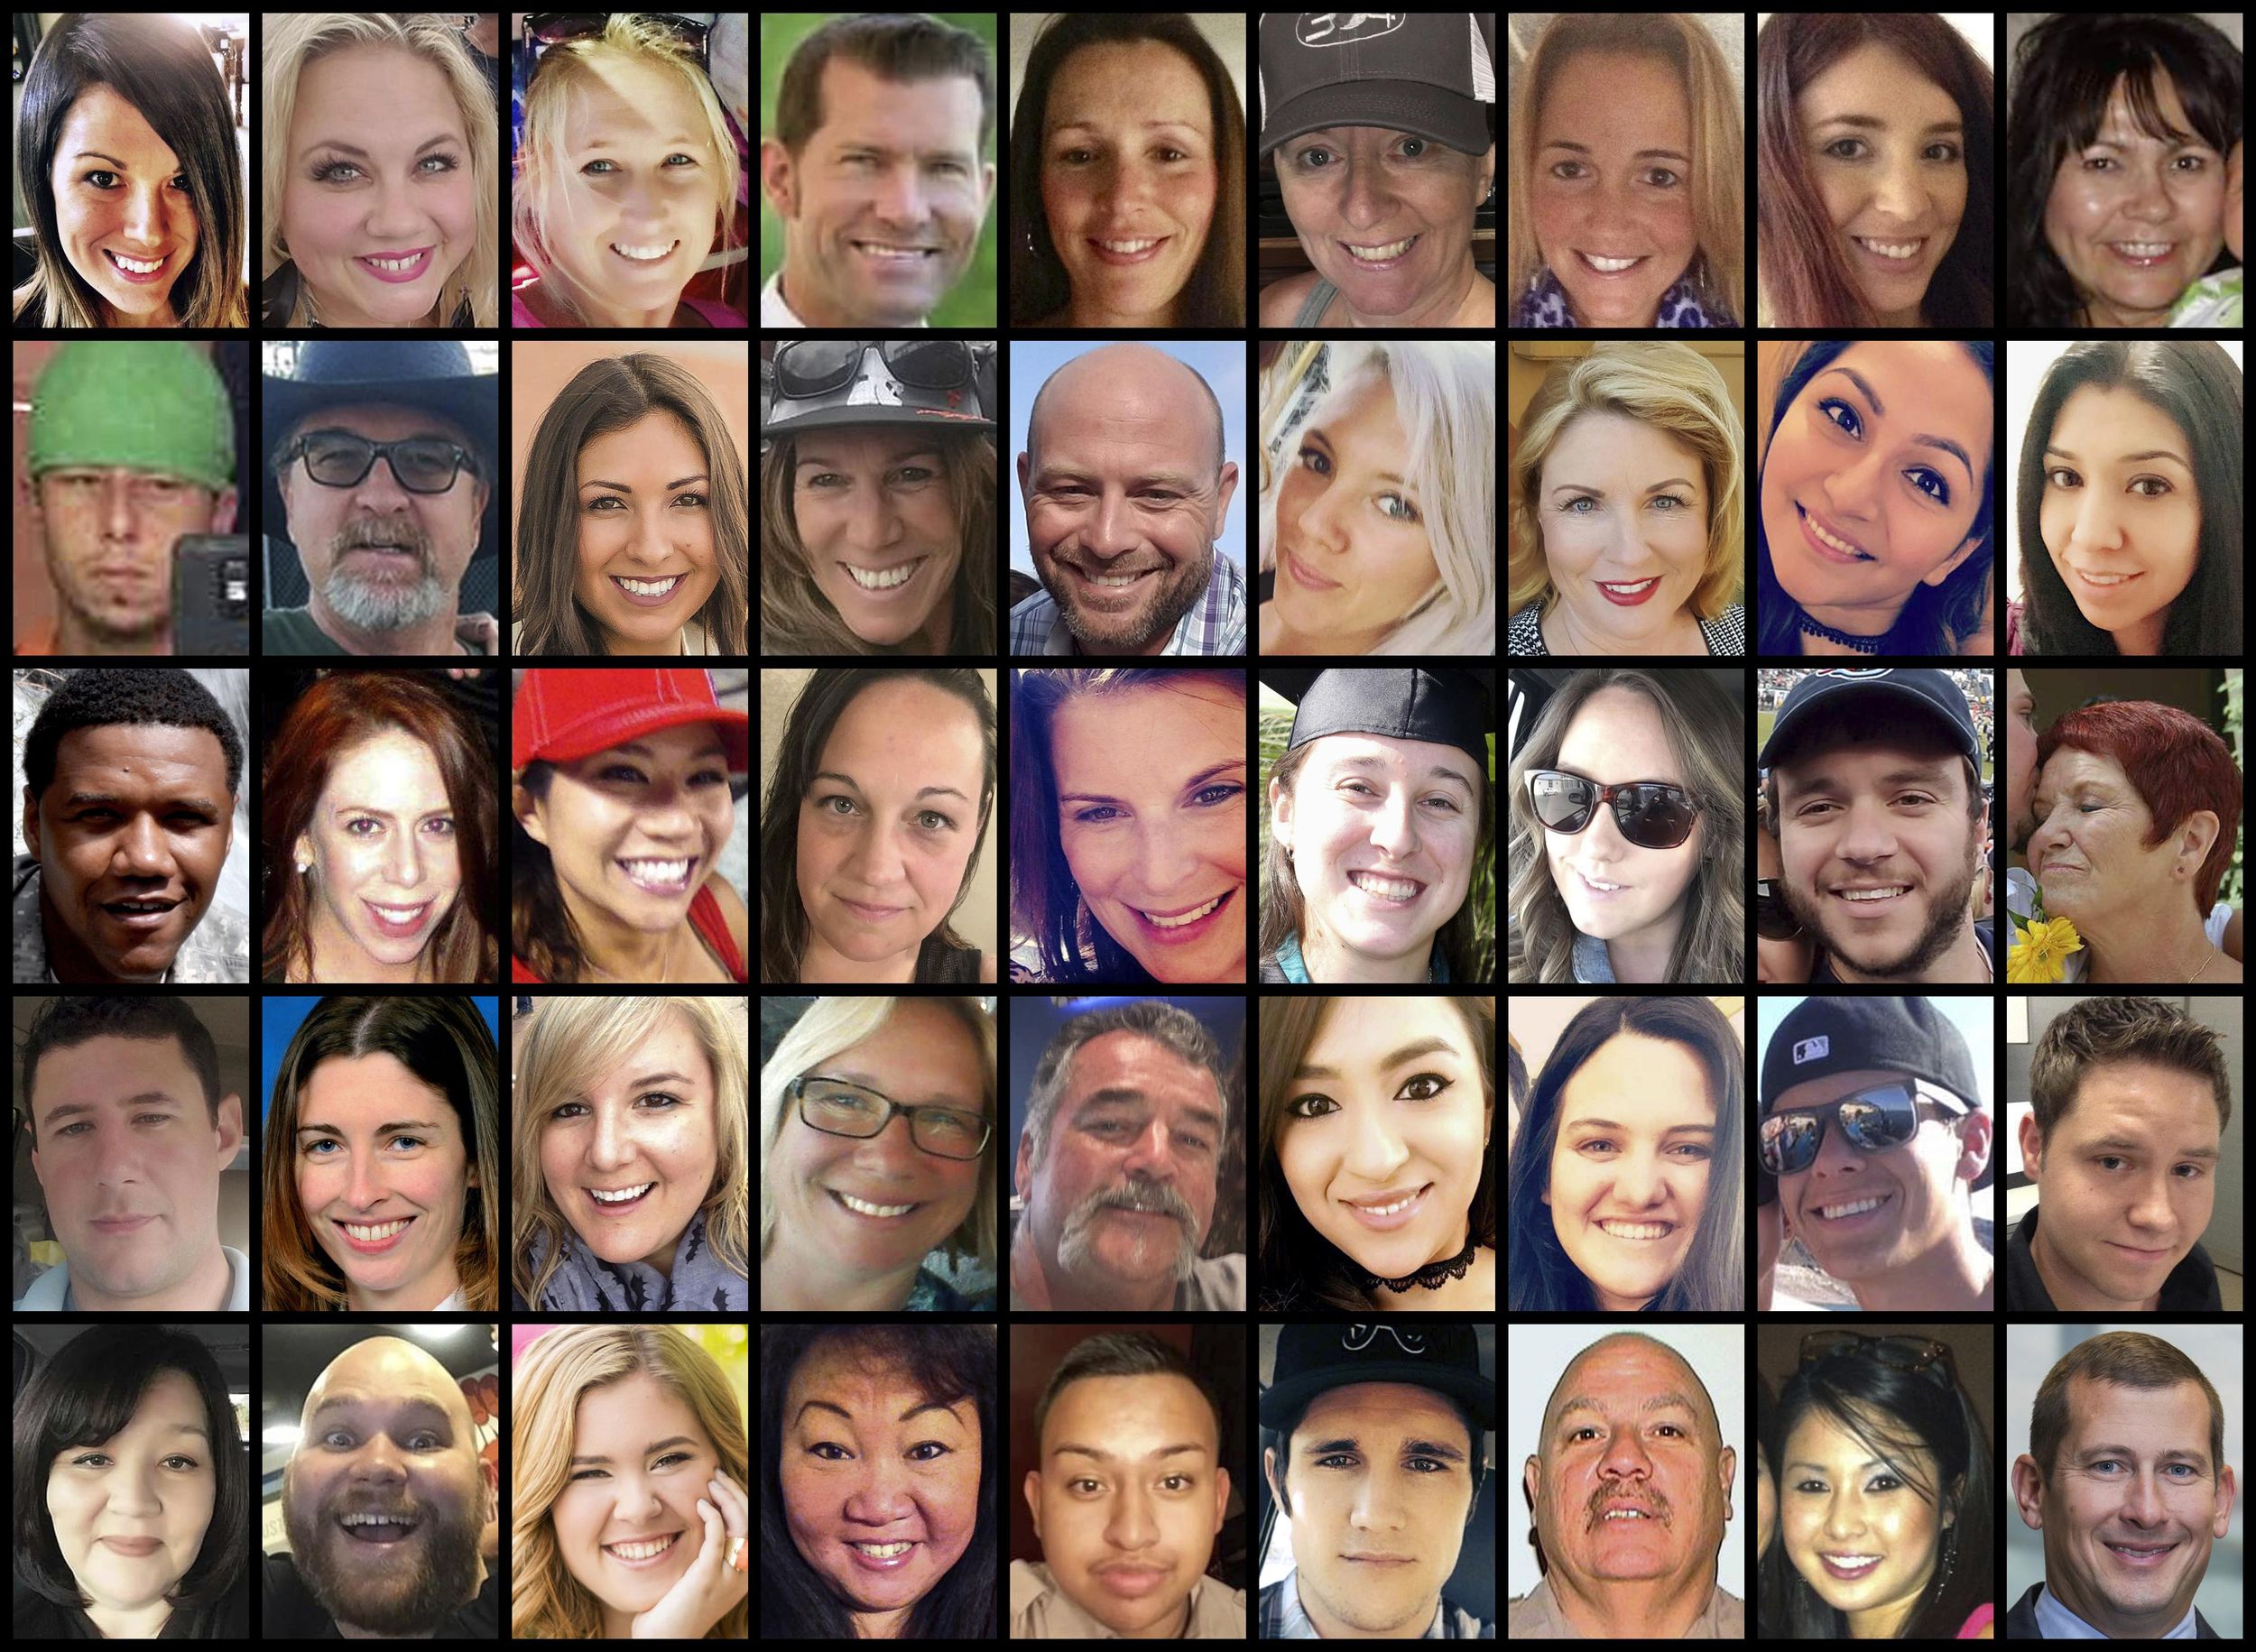 ‘He was raised right’ Vegas victims remembered The SpokesmanReview